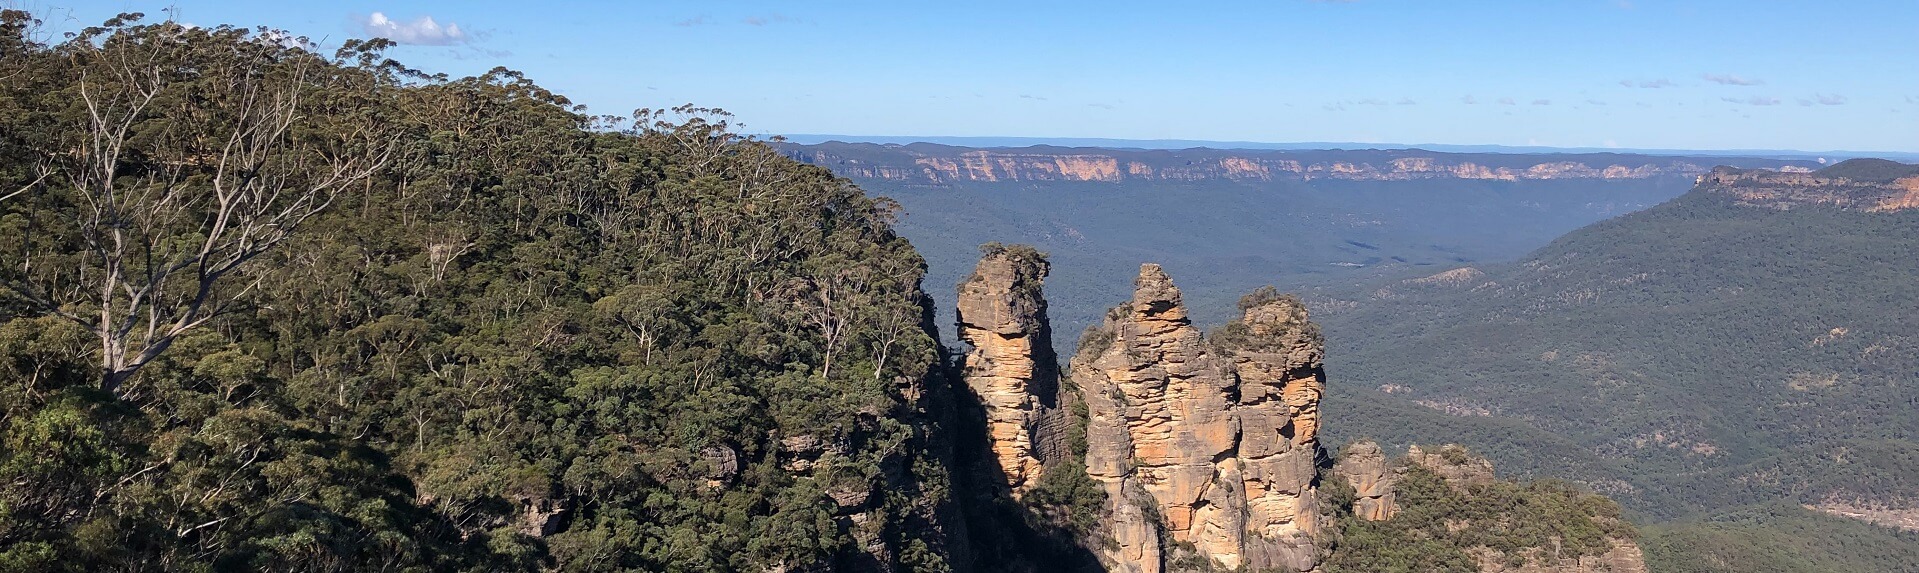 Where is the best place to view the Three Sisters?